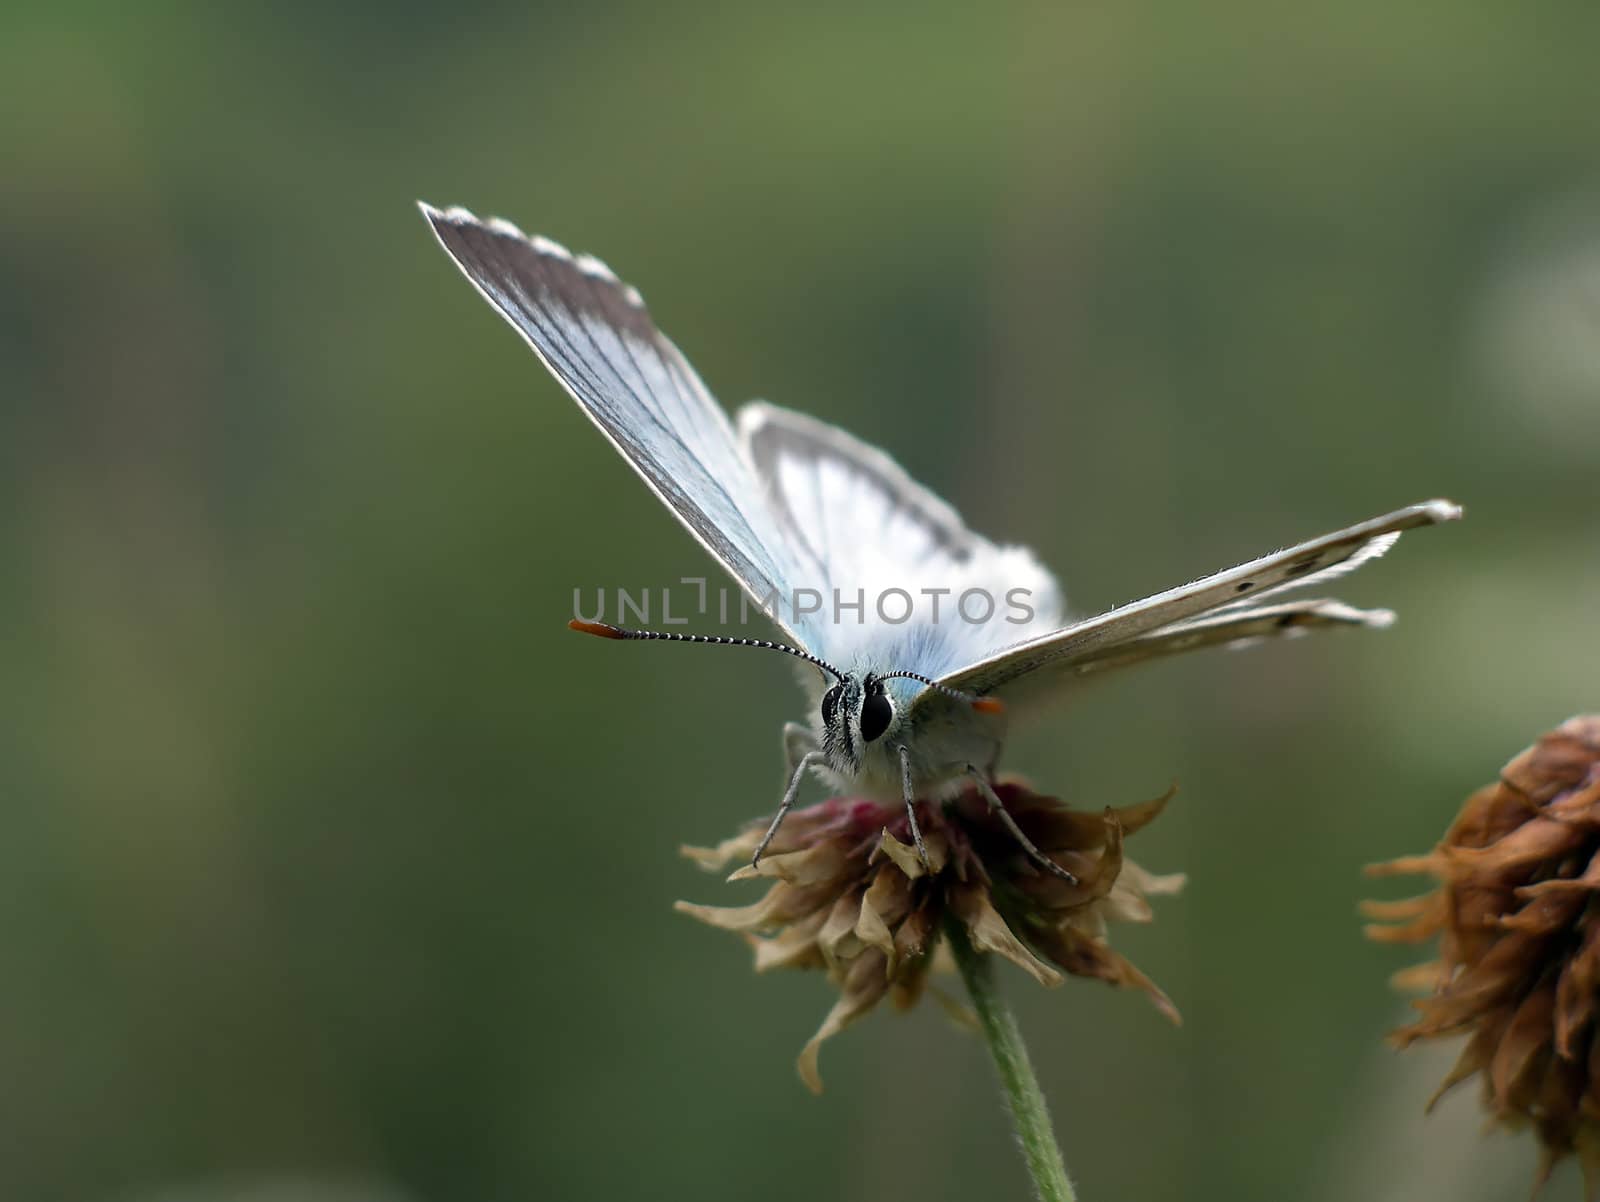 Close view of a butterfly (Lyssandra coridon) sitting on a clover